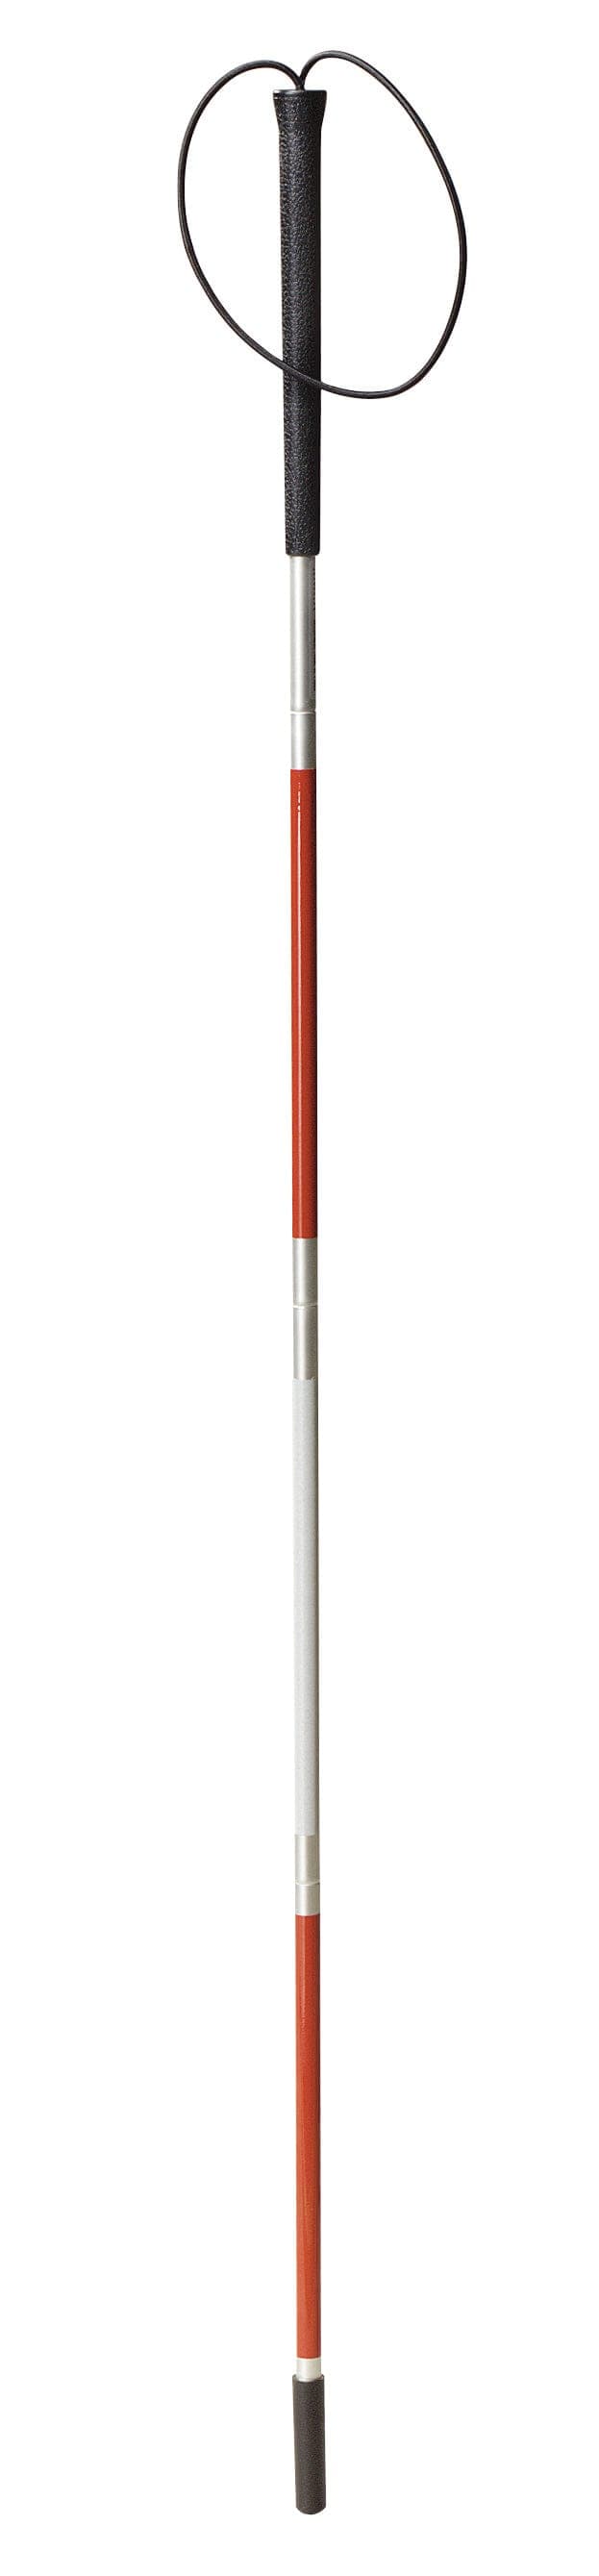 Drive Medical Drive Medical Folding Blind Cane with Wrist Strap 10352-1